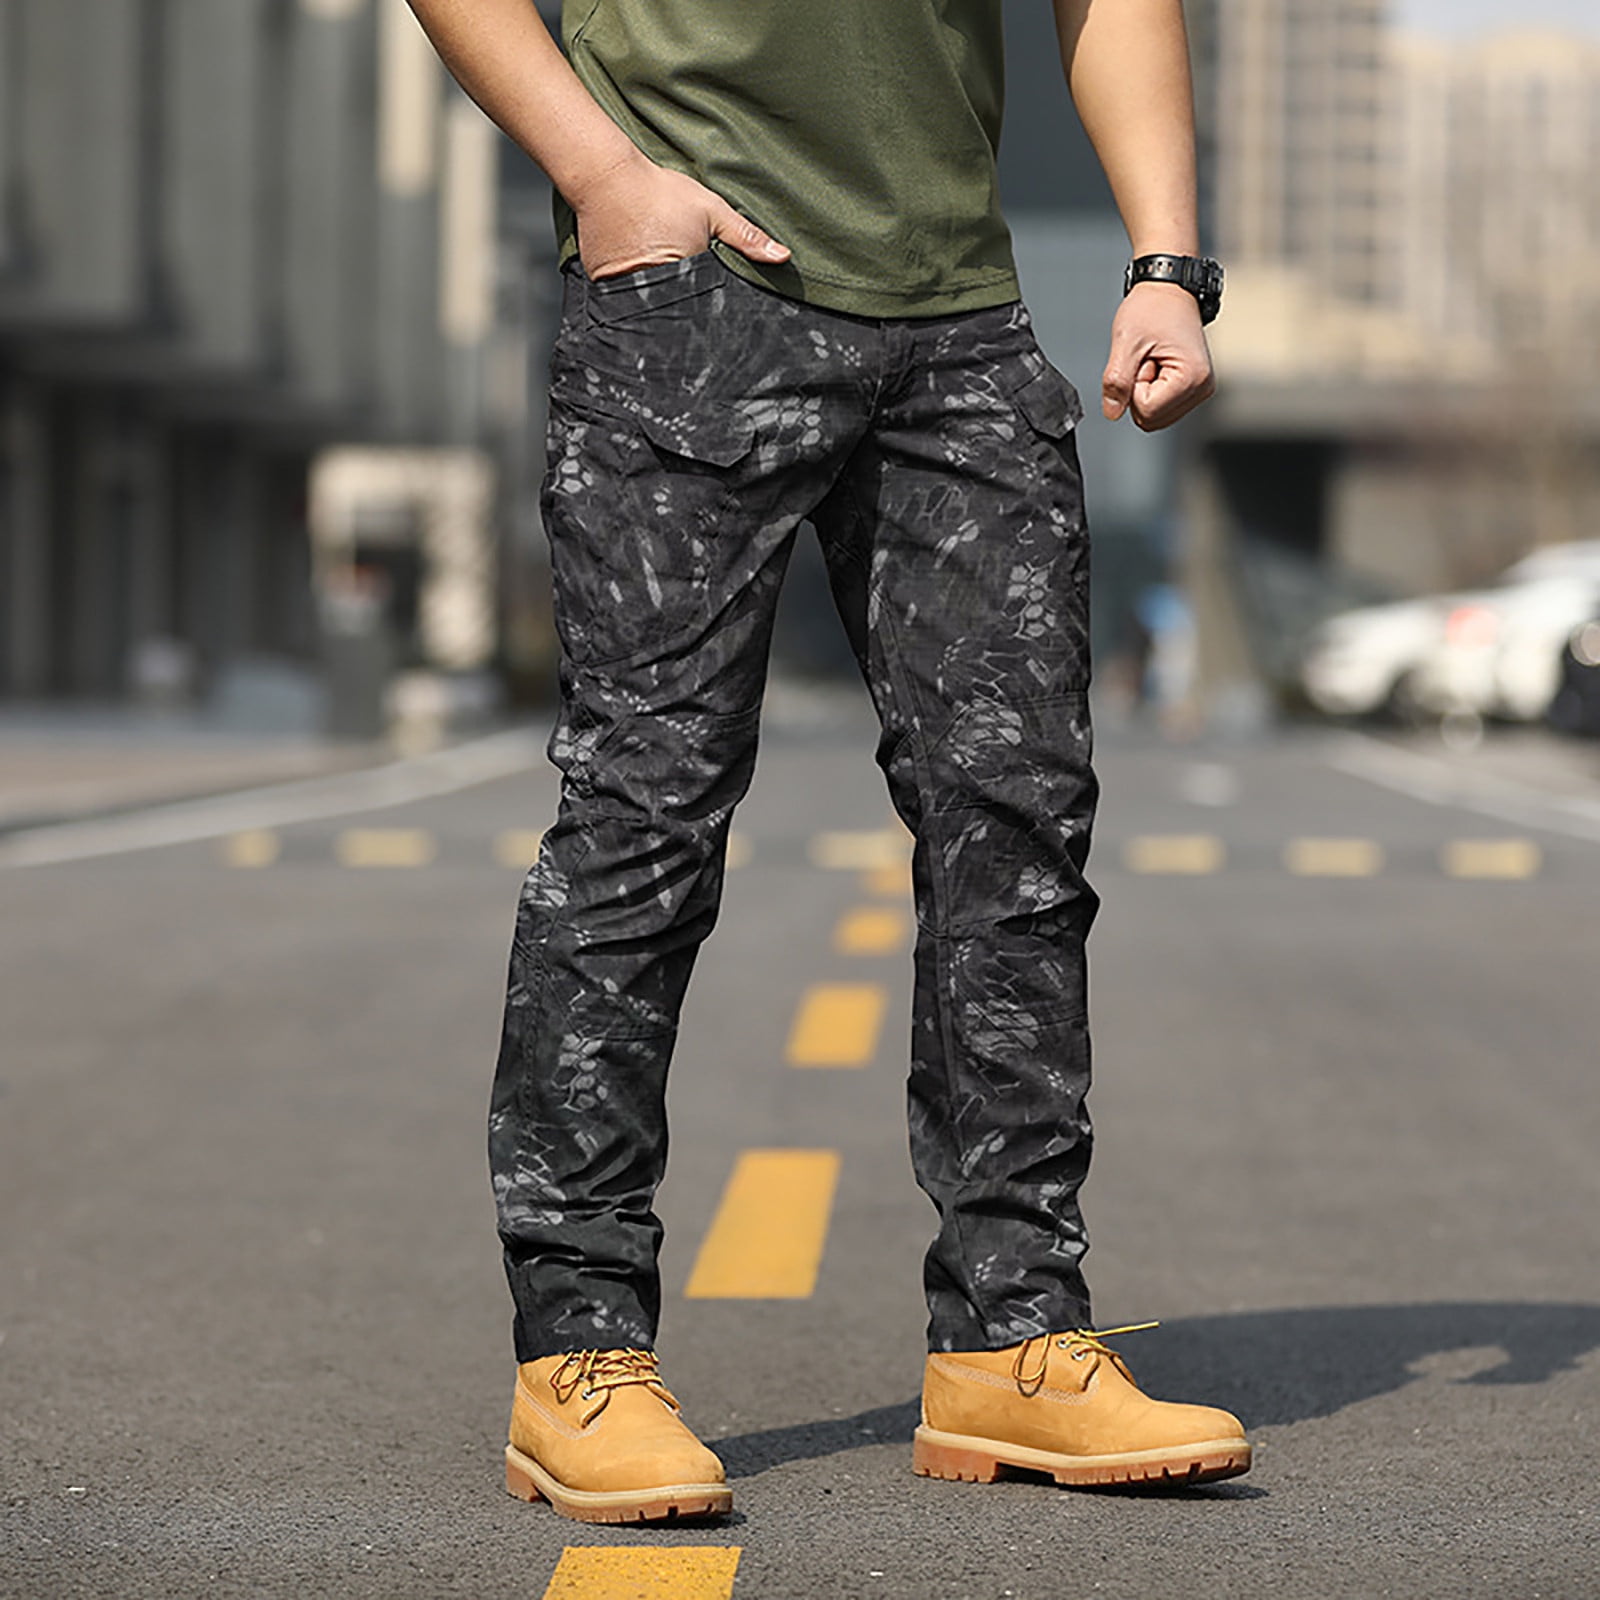 Aueoe Work Pants For Men Sweat Pants Male Men's Tooling Camouflage